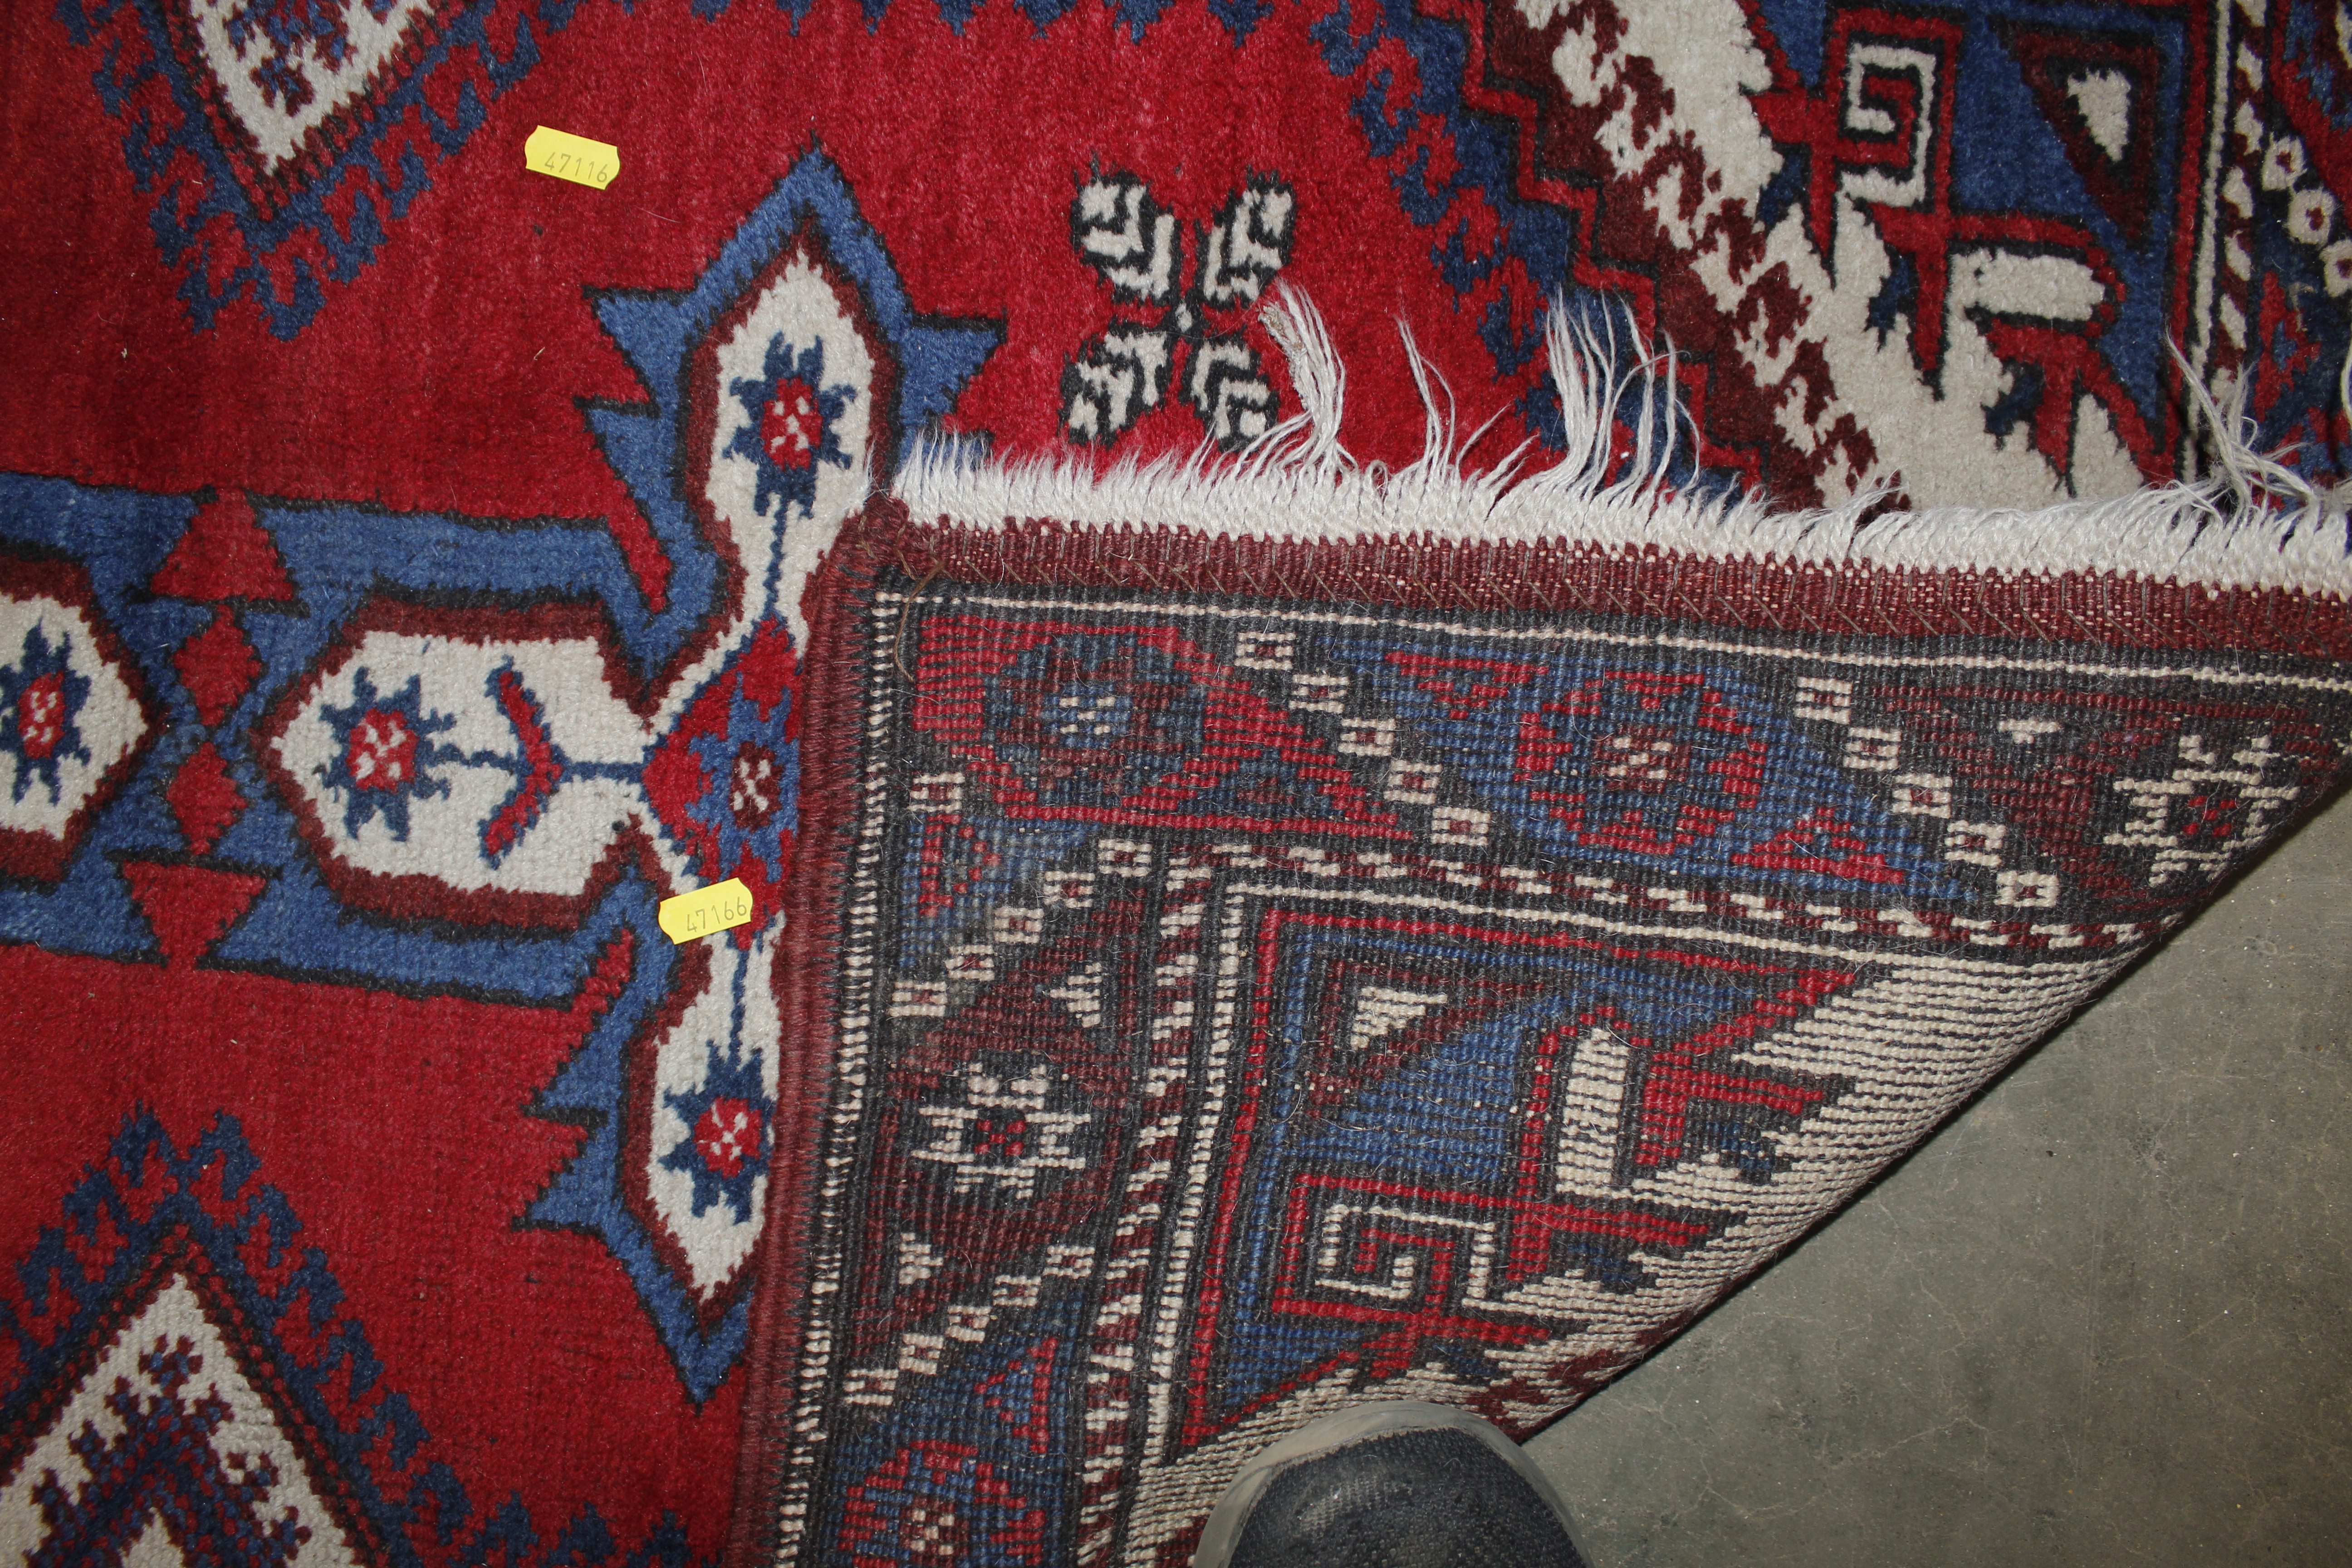 An approx. 4'2" x 2'5" red and blue patterned rug - Image 3 of 3